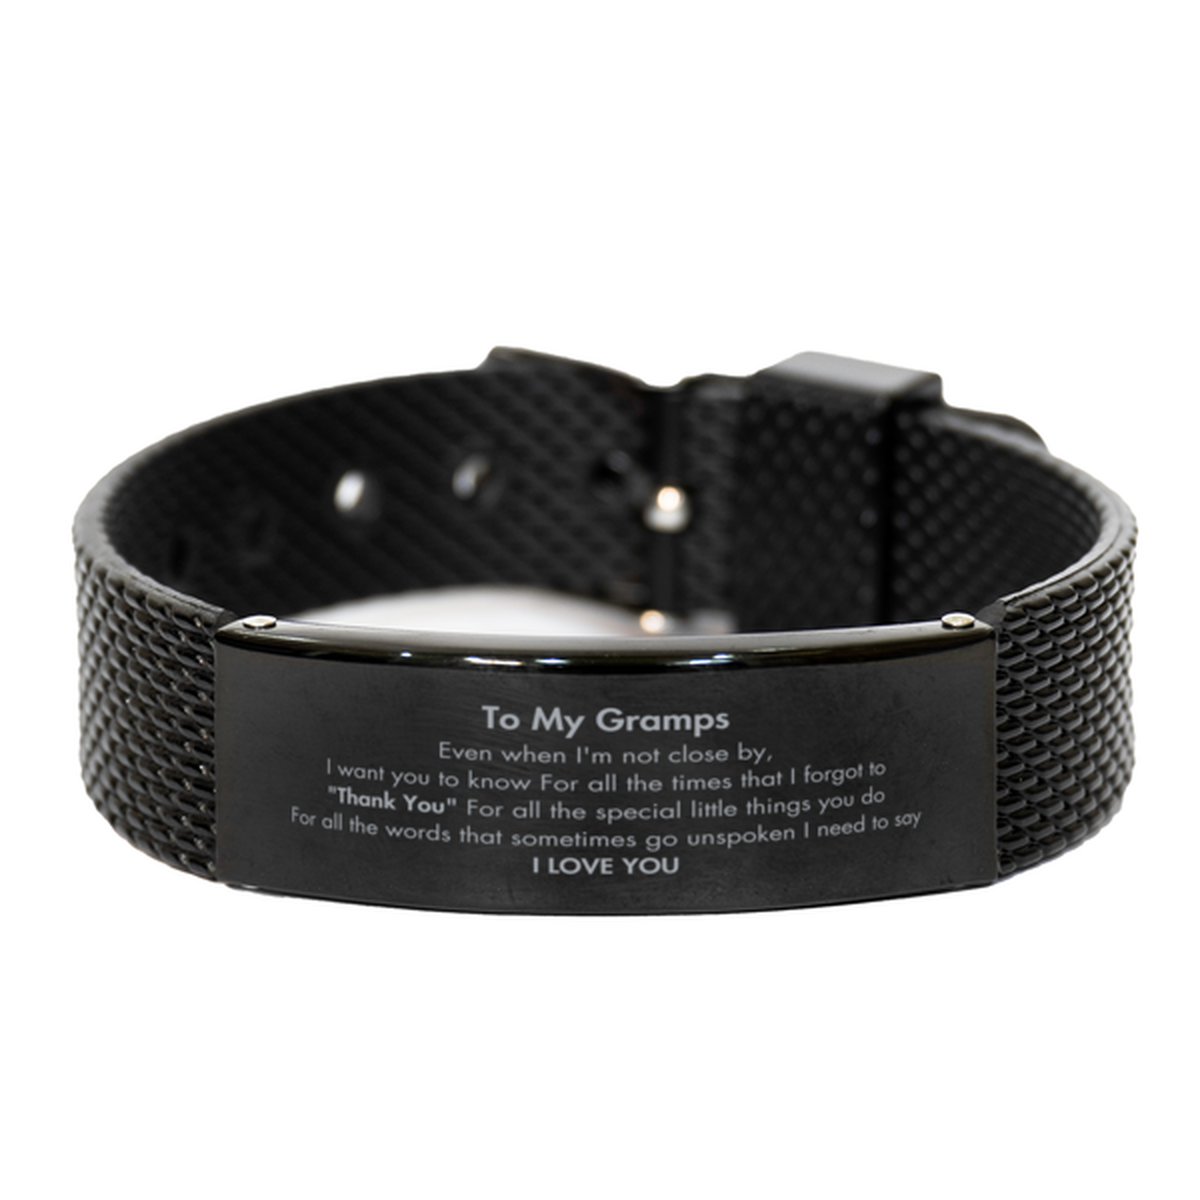 Thank You Gifts for Gramps, Keepsake Black Shark Mesh Bracelet Gifts for Gramps Birthday Mother's day Father's Day Gramps For all the words That sometimes go unspoken I need to say I LOVE YOU